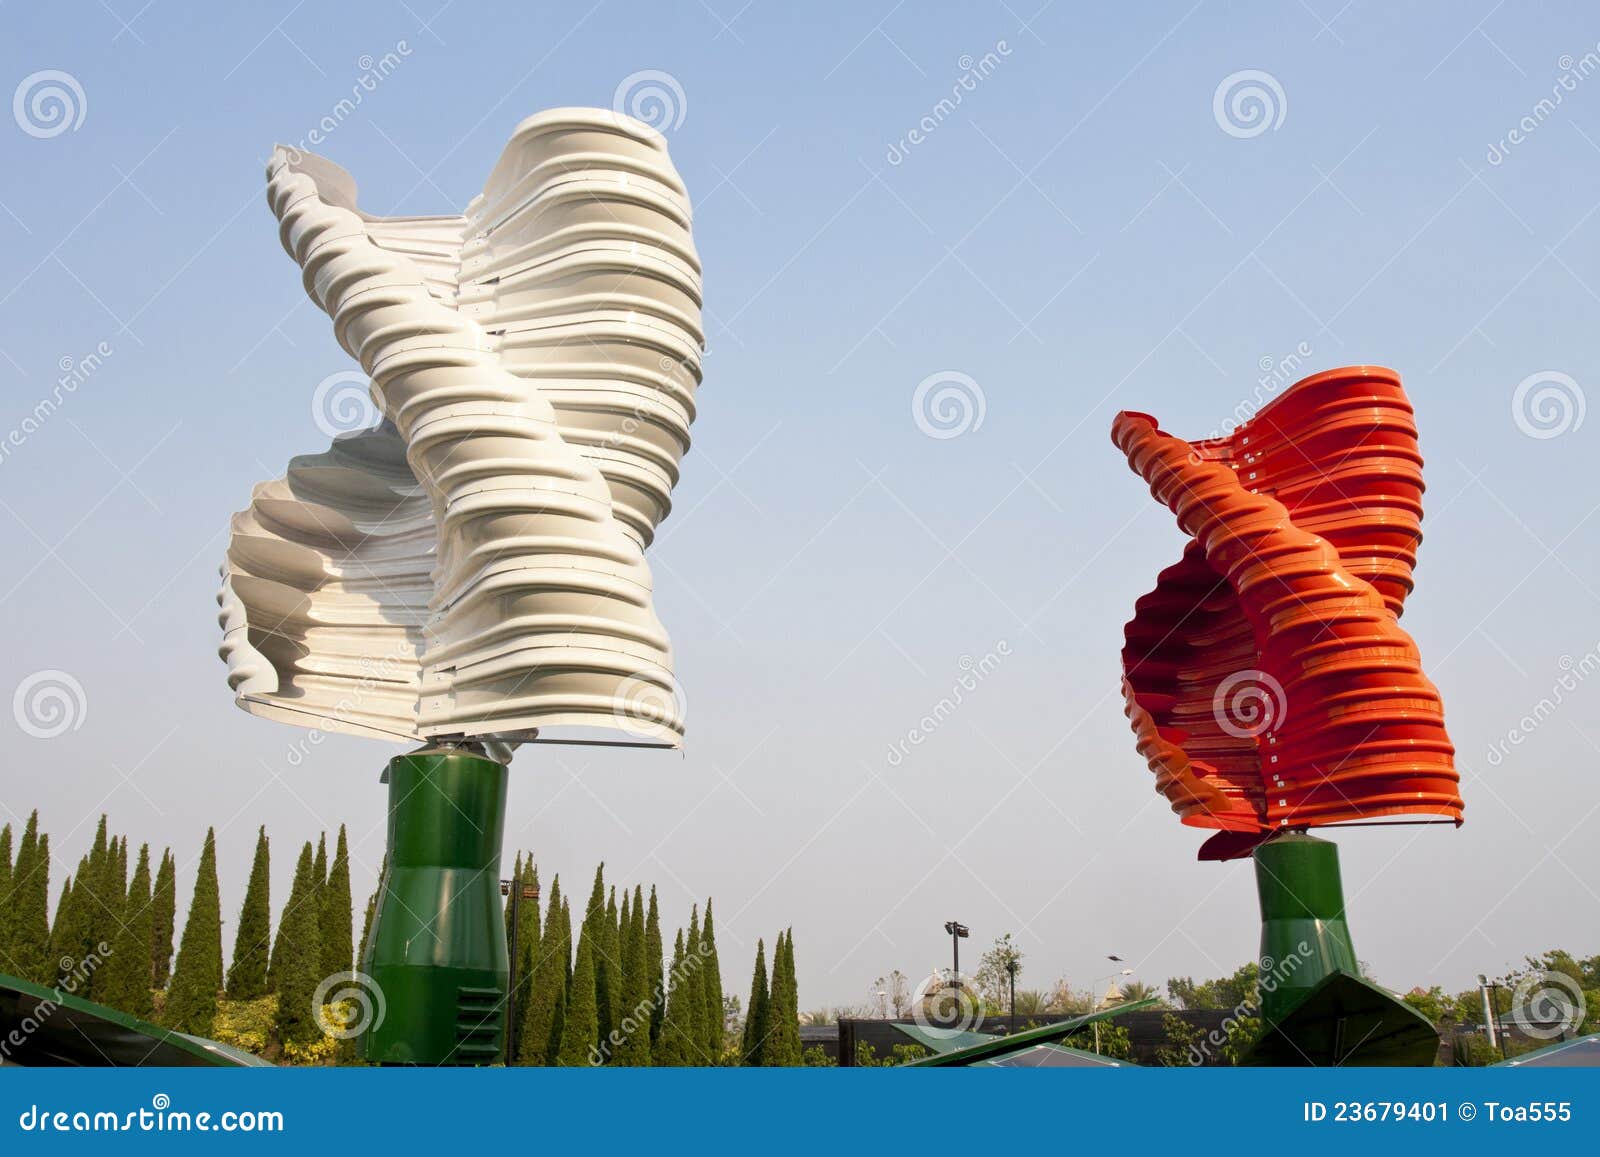 Vertical-axis wind turbines (VAWTs) are a type of wind turbine where 